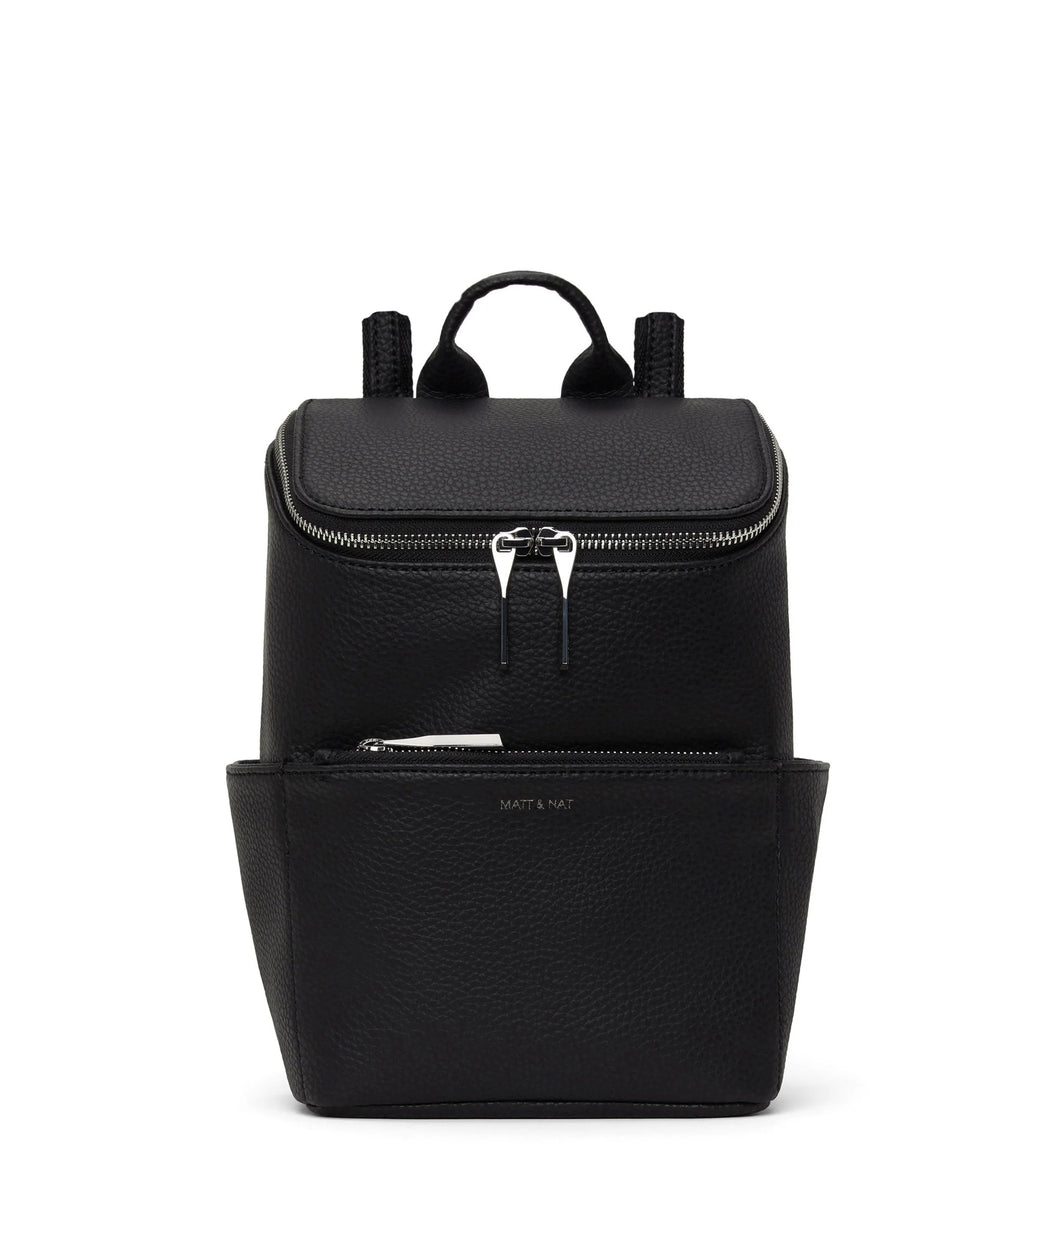 BRAVE SMALL PURITY BACKPACK IN BLACK